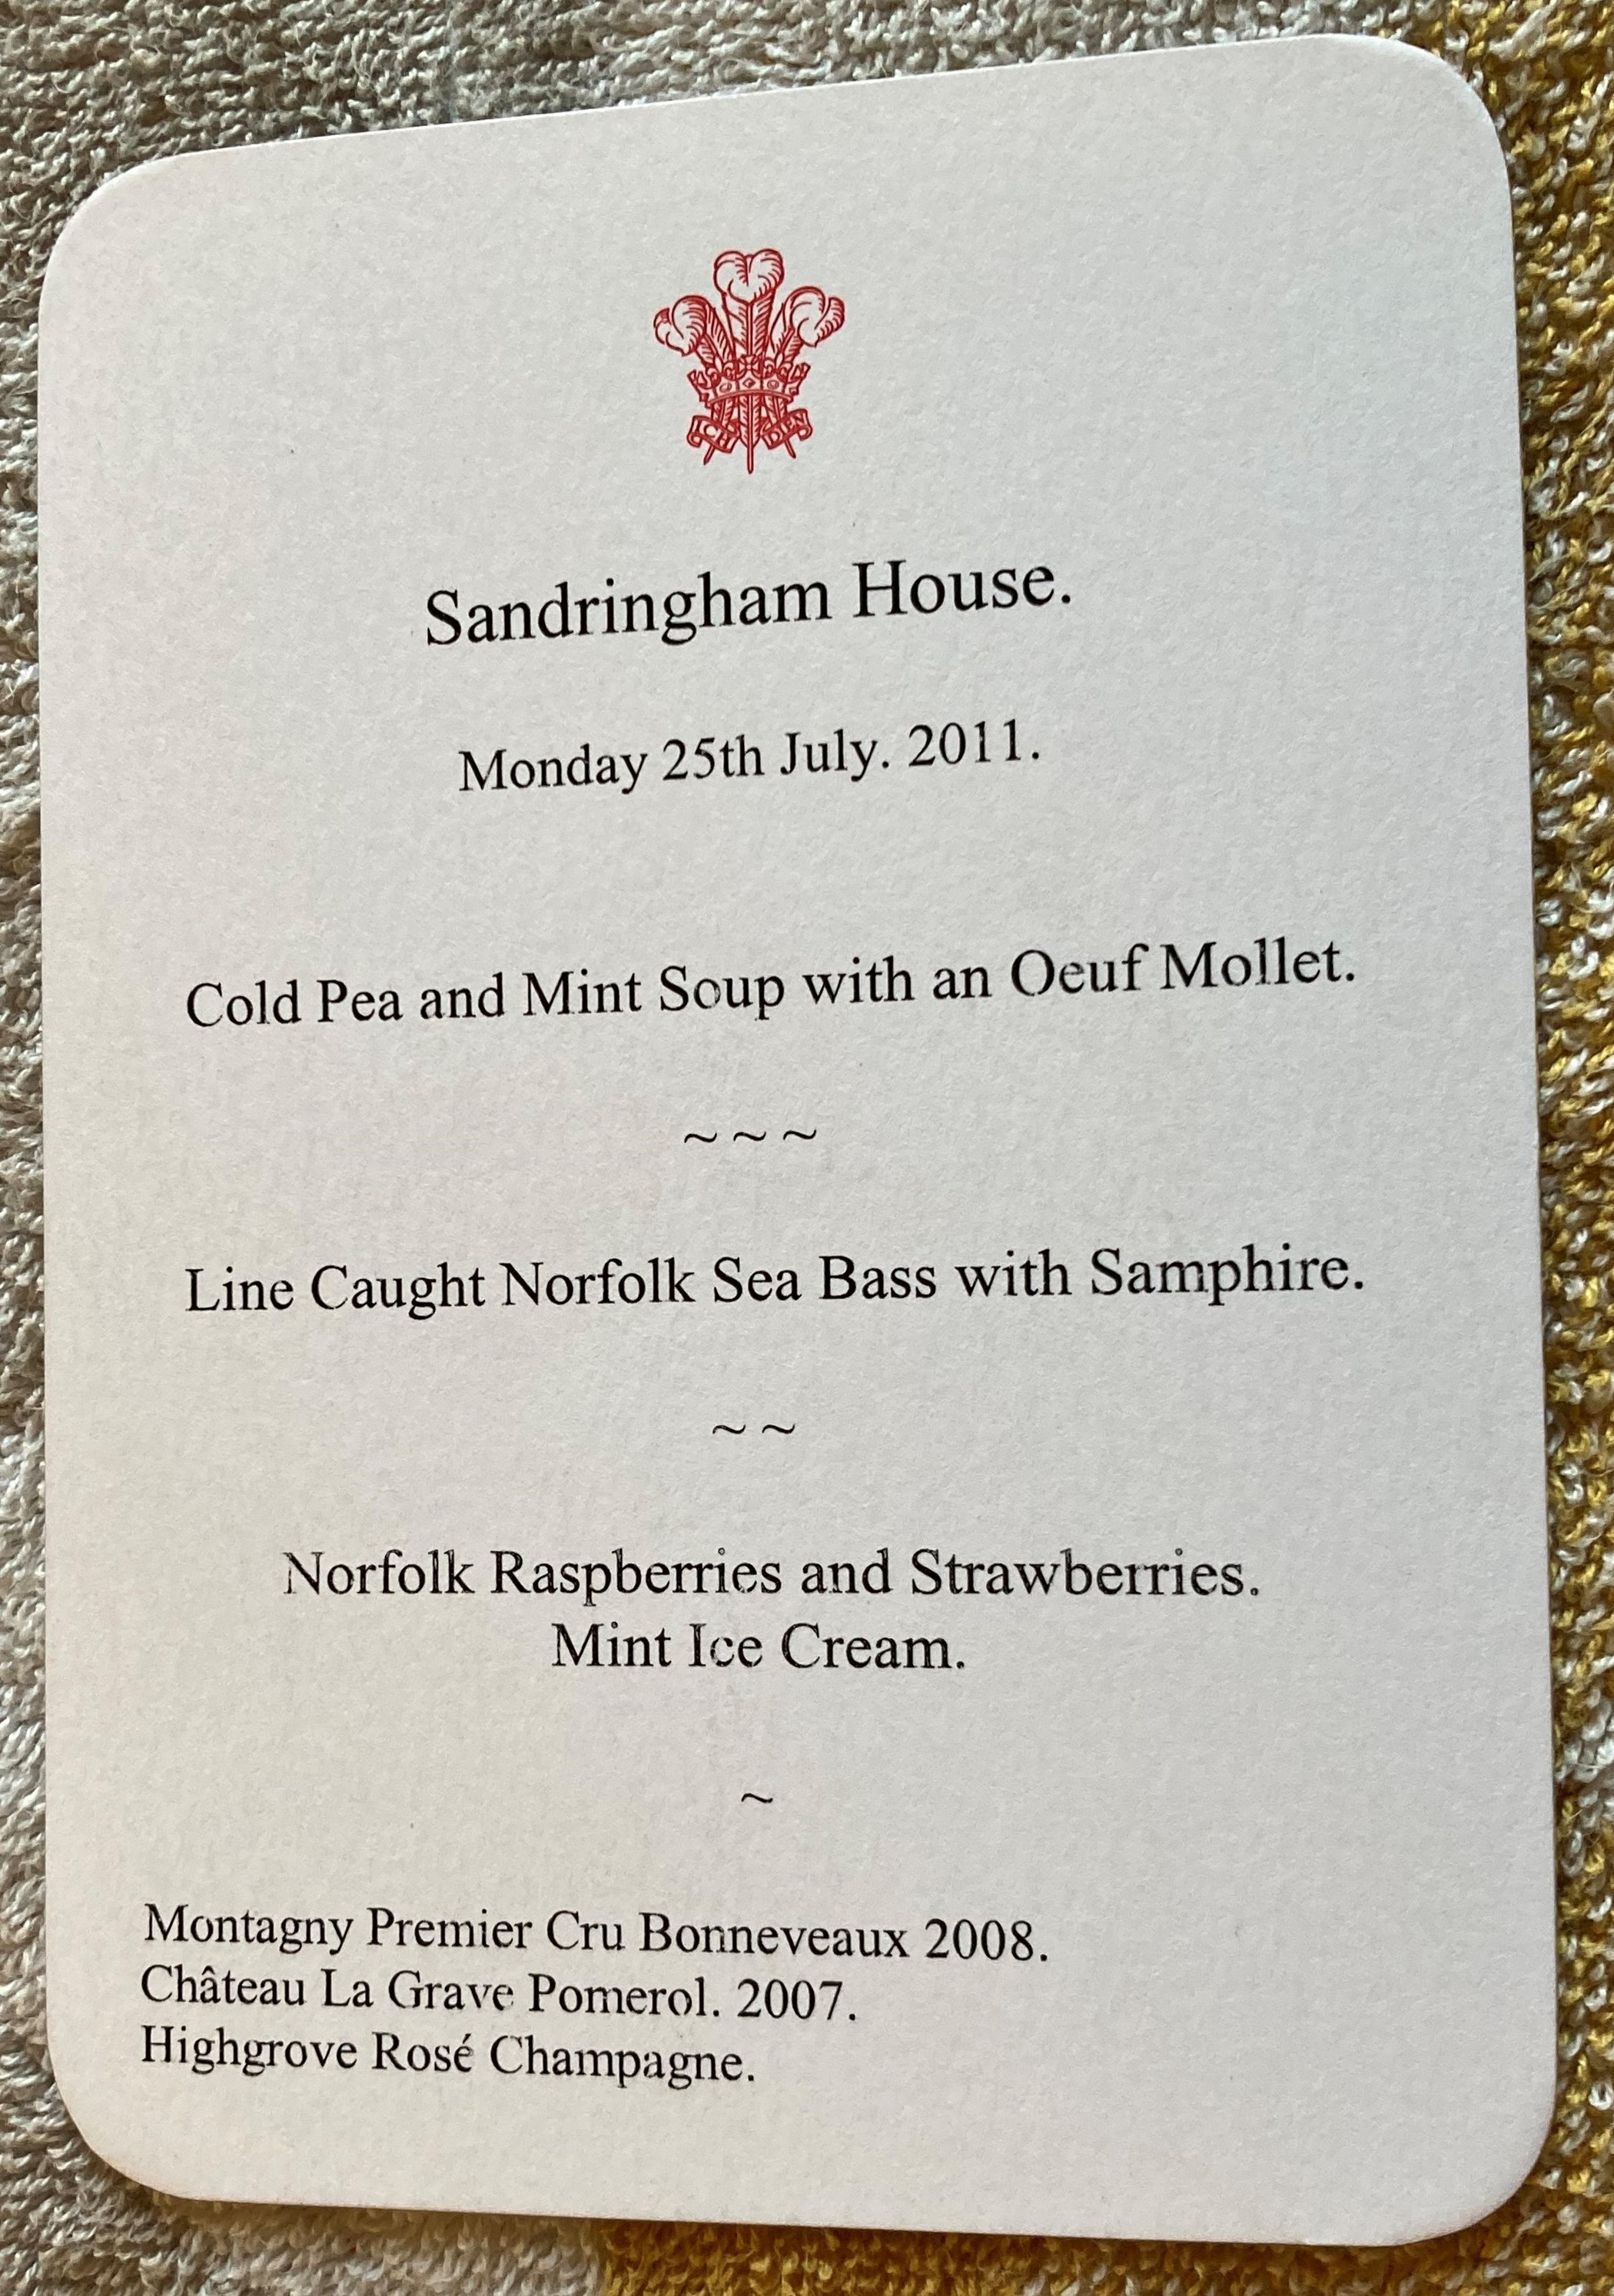 King Charles Sandringham House dinner menu when Prince of Wales 25th July 2011, with red royal logo.